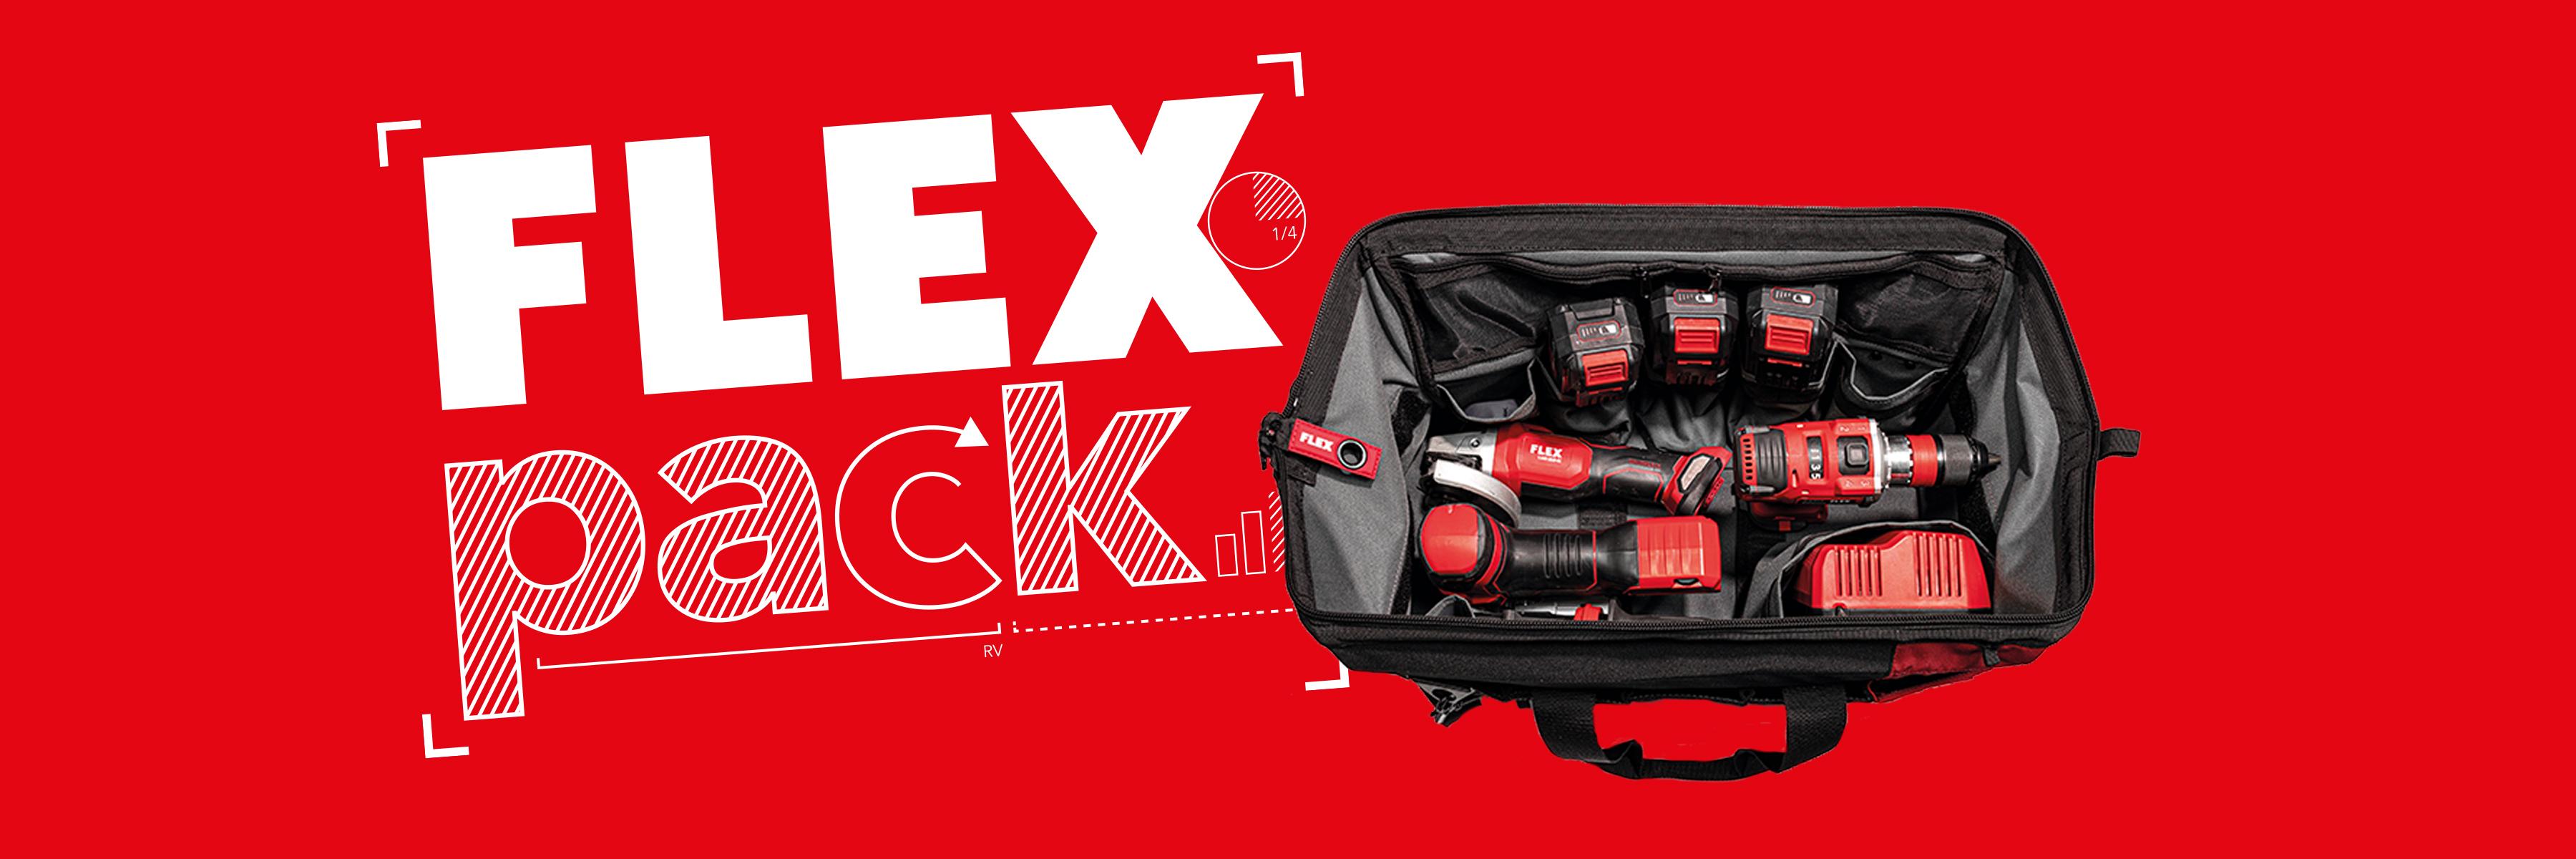 FLEXPACK promotion: 3 FLEX cordless machines with charger and batteries in bag